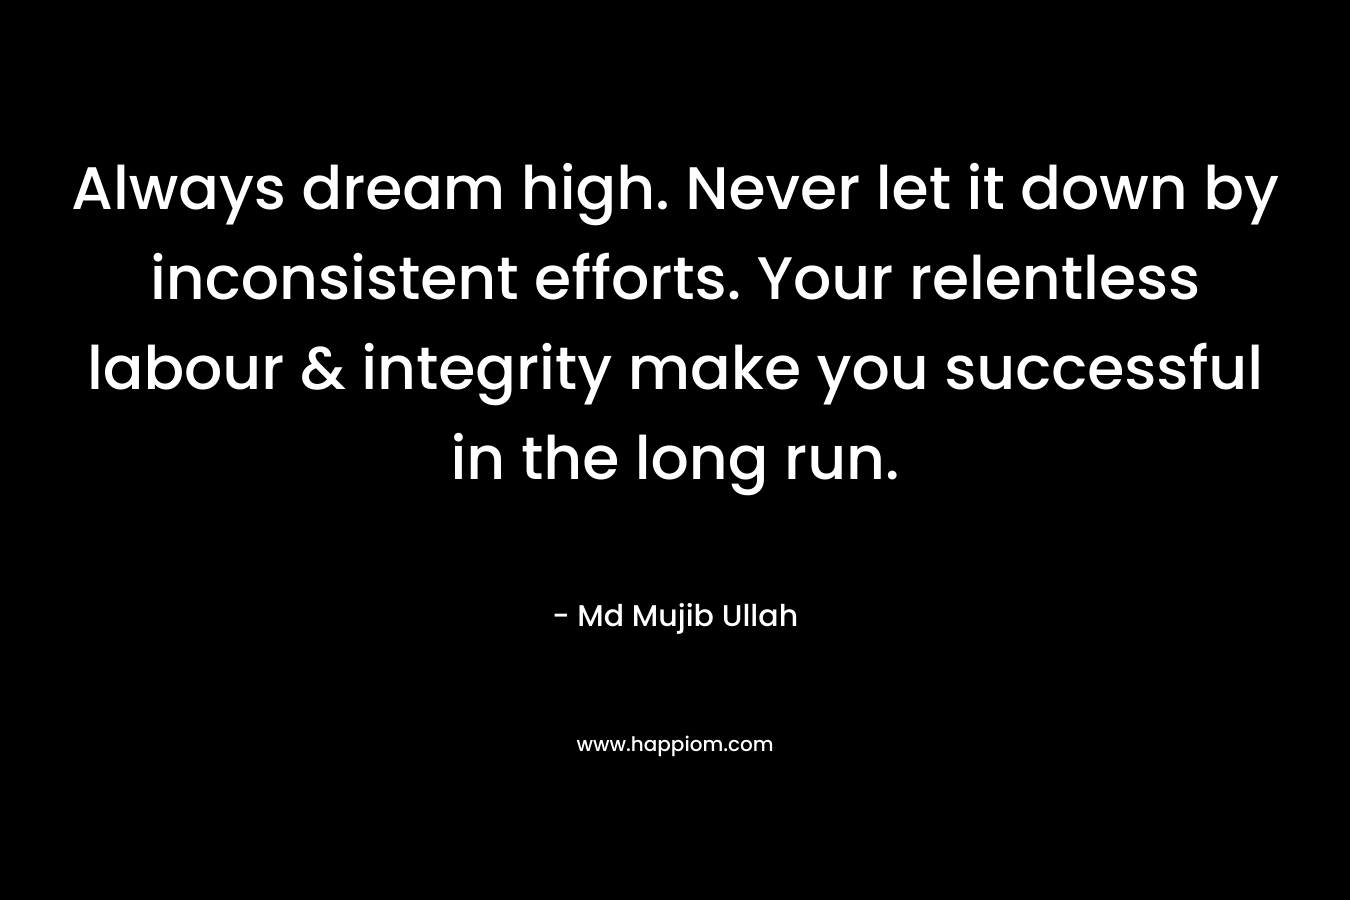 Always dream high. Never let it down by inconsistent efforts. Your relentless labour & integrity make you successful in the long run.